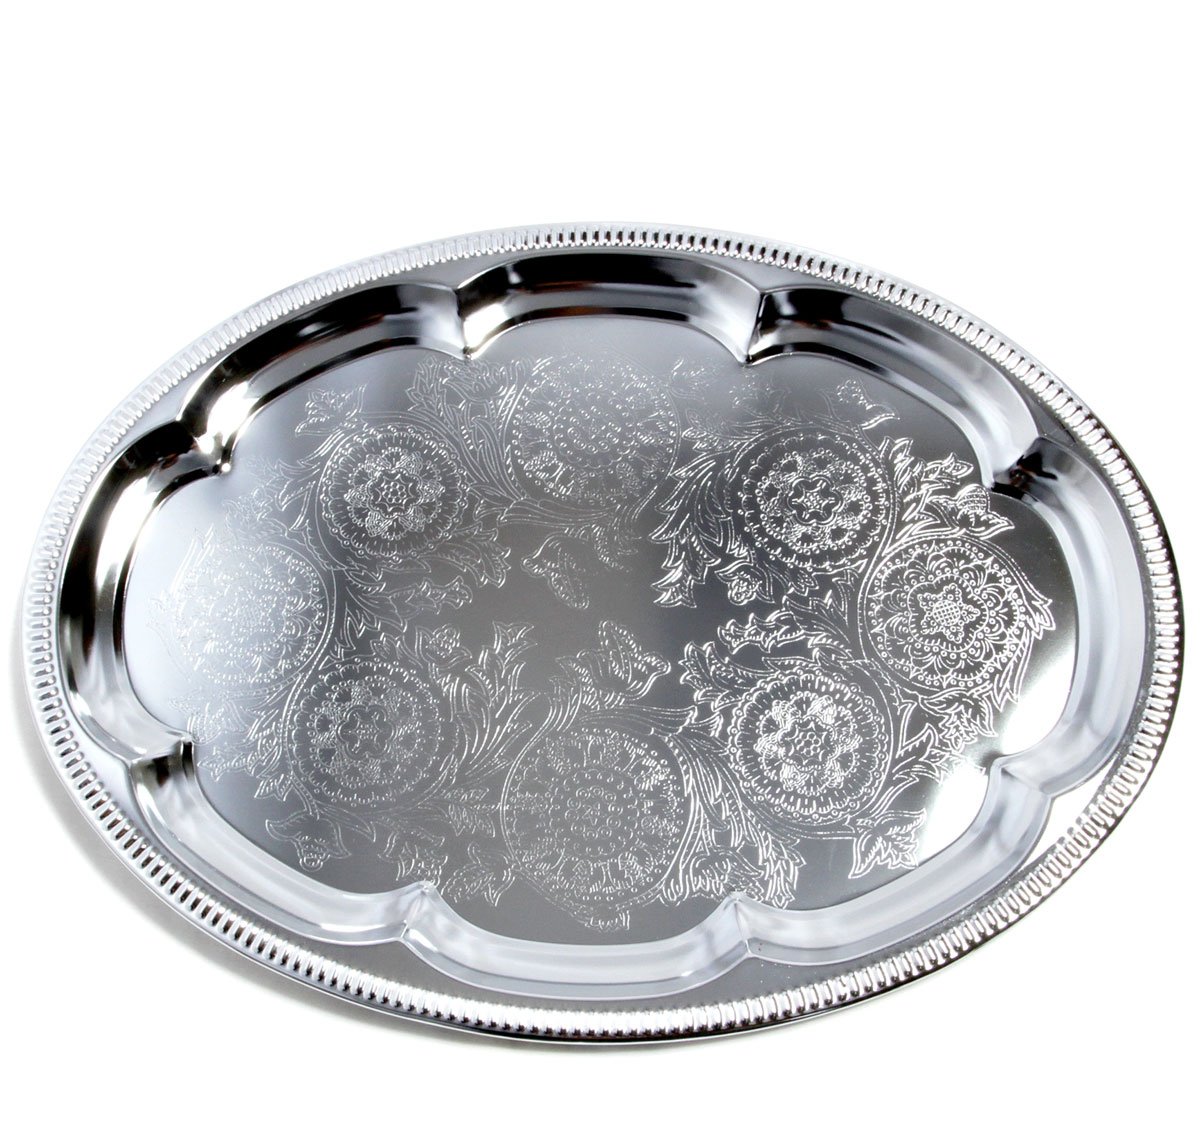 Maro Megastore (Pack of 4) 18.1 inch x 13.3 inch Traditional Oval Floral Pattern Engraved Catering Chrome Plated Serving Plate Mirror Tray Platter Metal Tableware Holiday Party Large T225-4PK